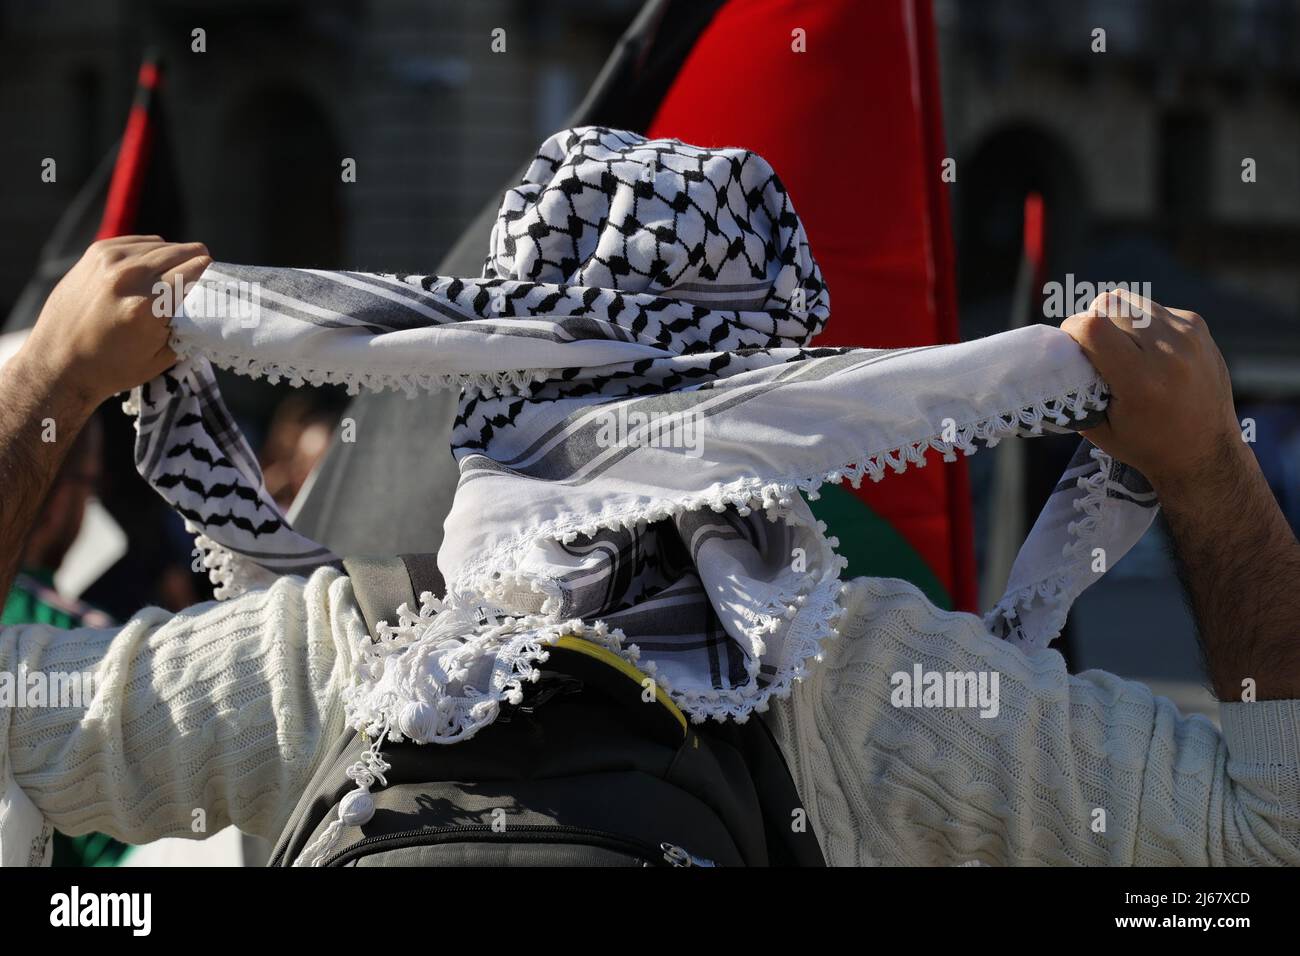 Turin, Italy. 28th April, 2022. A man ties his keffiyeh at a protest against the raids of Israeli forces in West Bank and restrictions on access to holy sites in Jerusalem during the Ramadan time. Credit: MLBARIONA/Alamy Live News Stock Photo